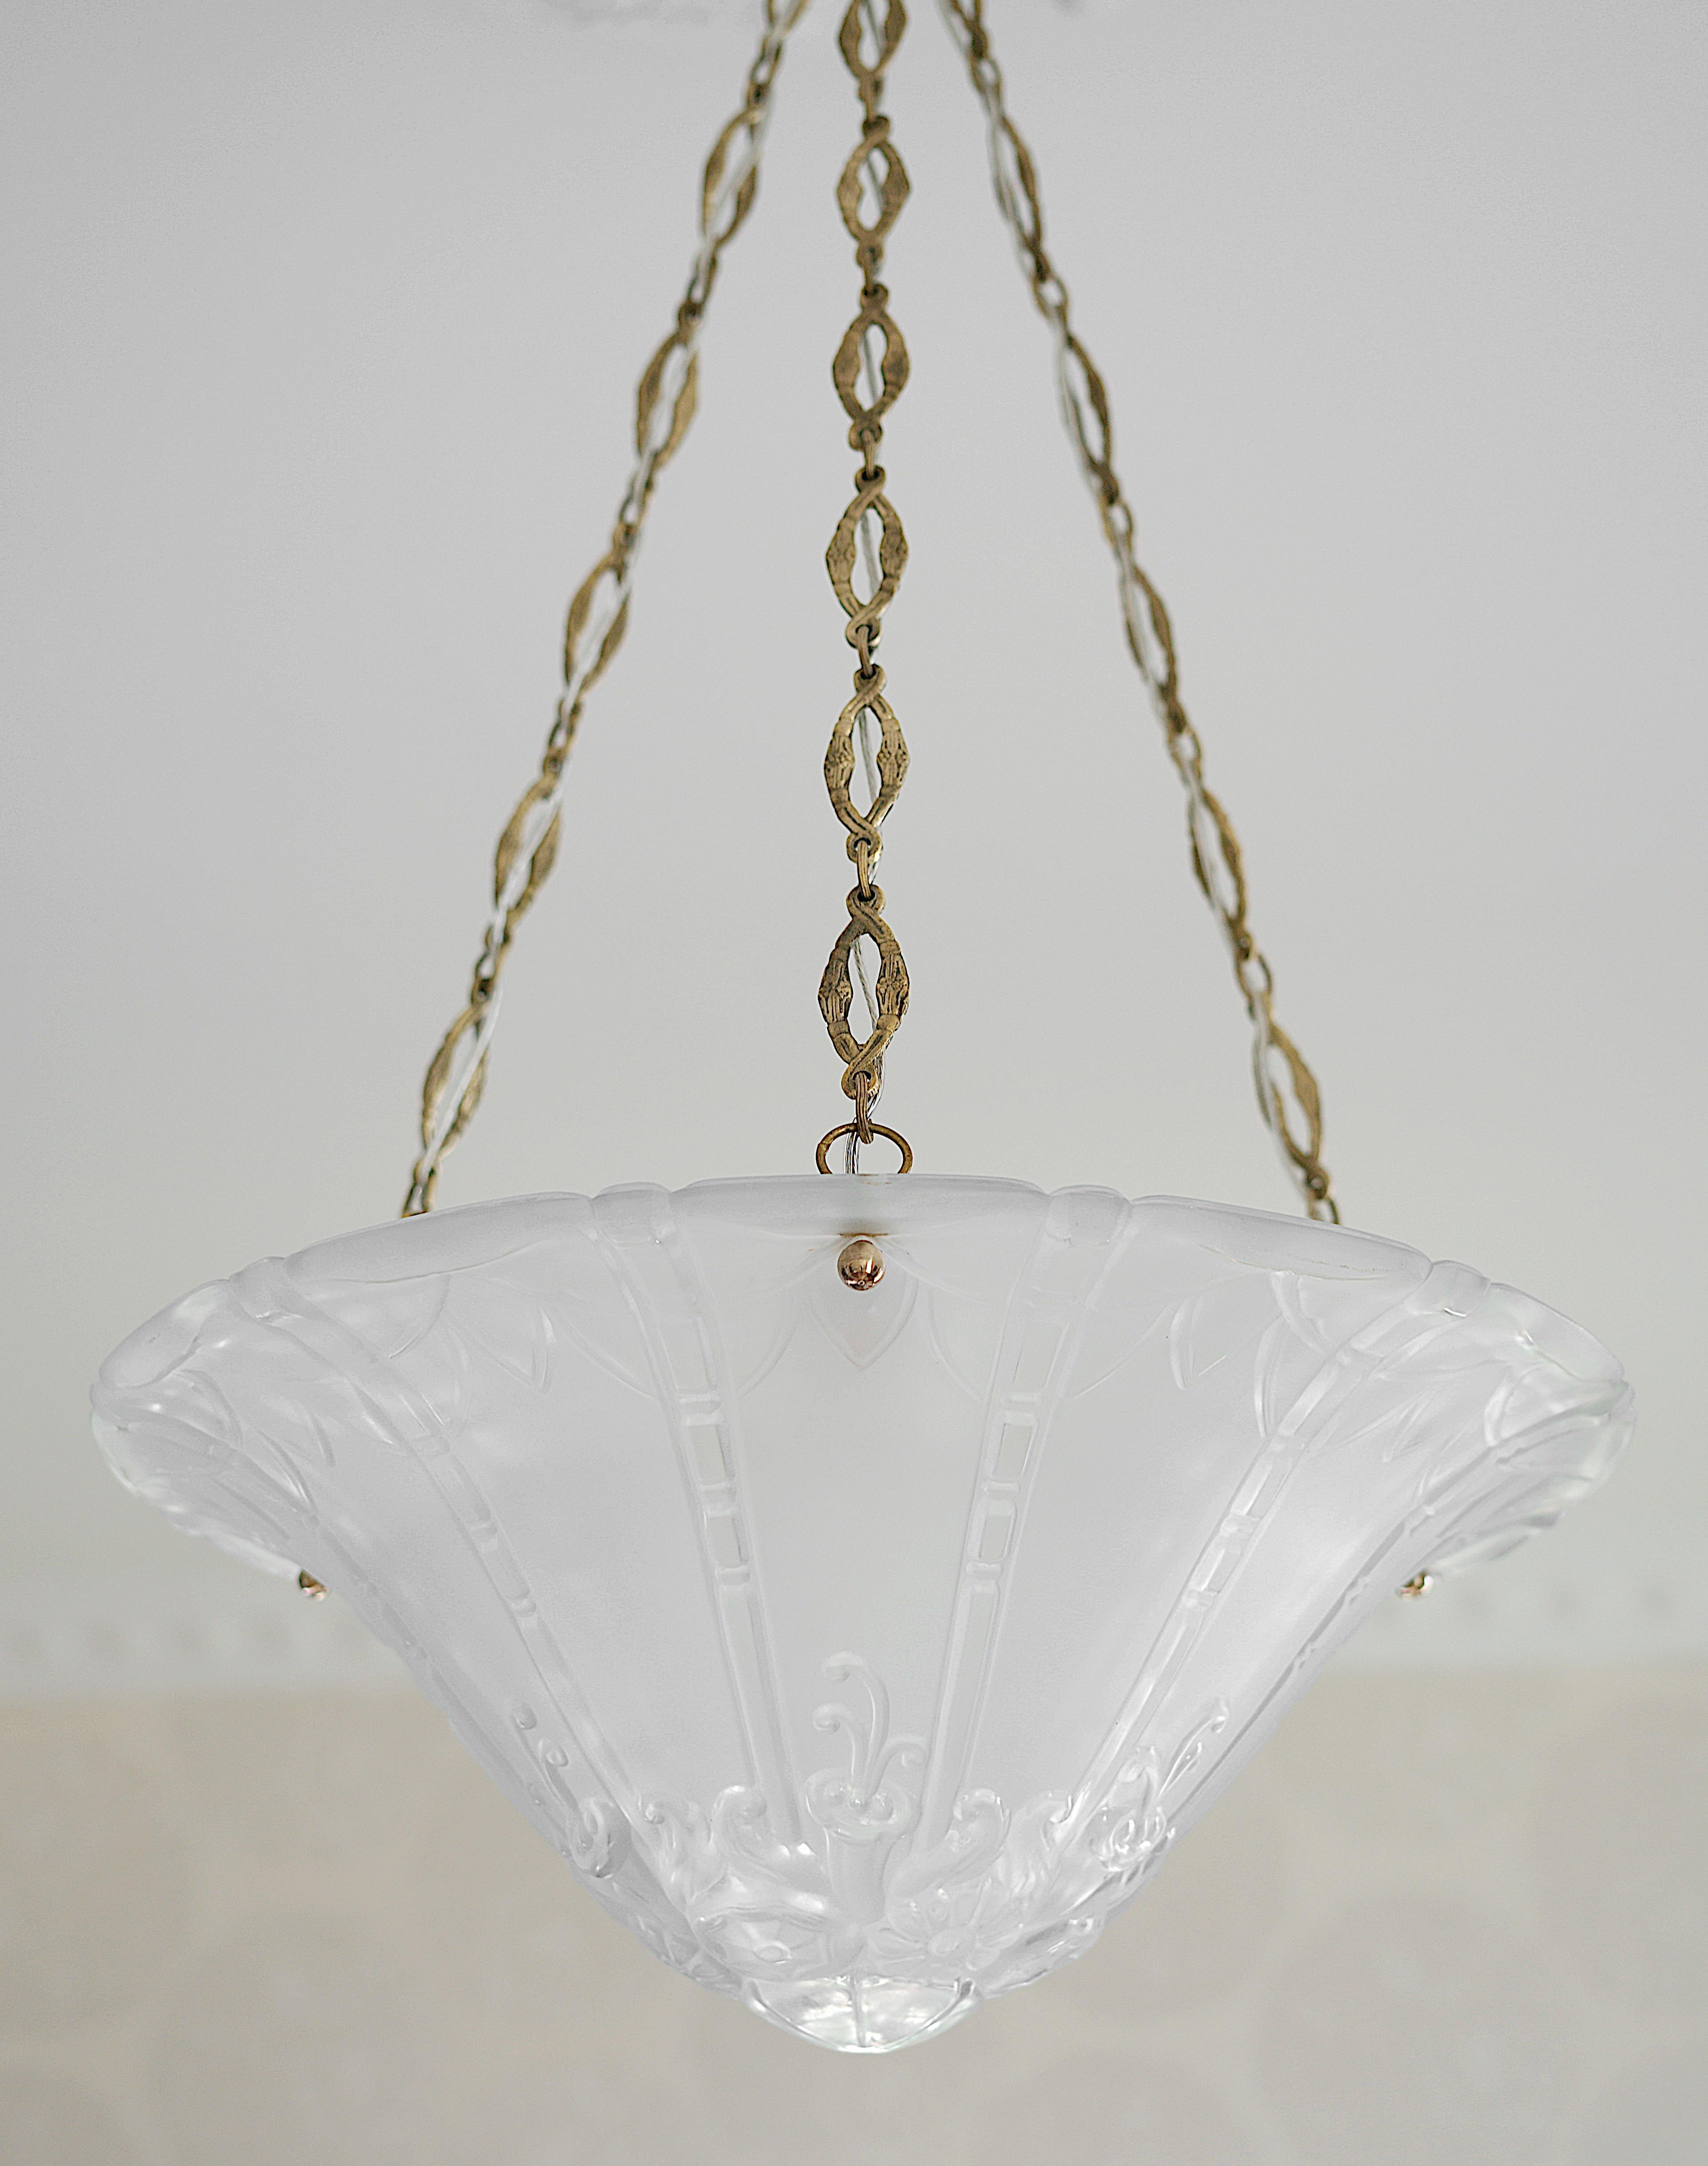 Bronze Daum Pierre D'Avesn Large French Art Deco Pendant Chandelier, Early 1930s For Sale